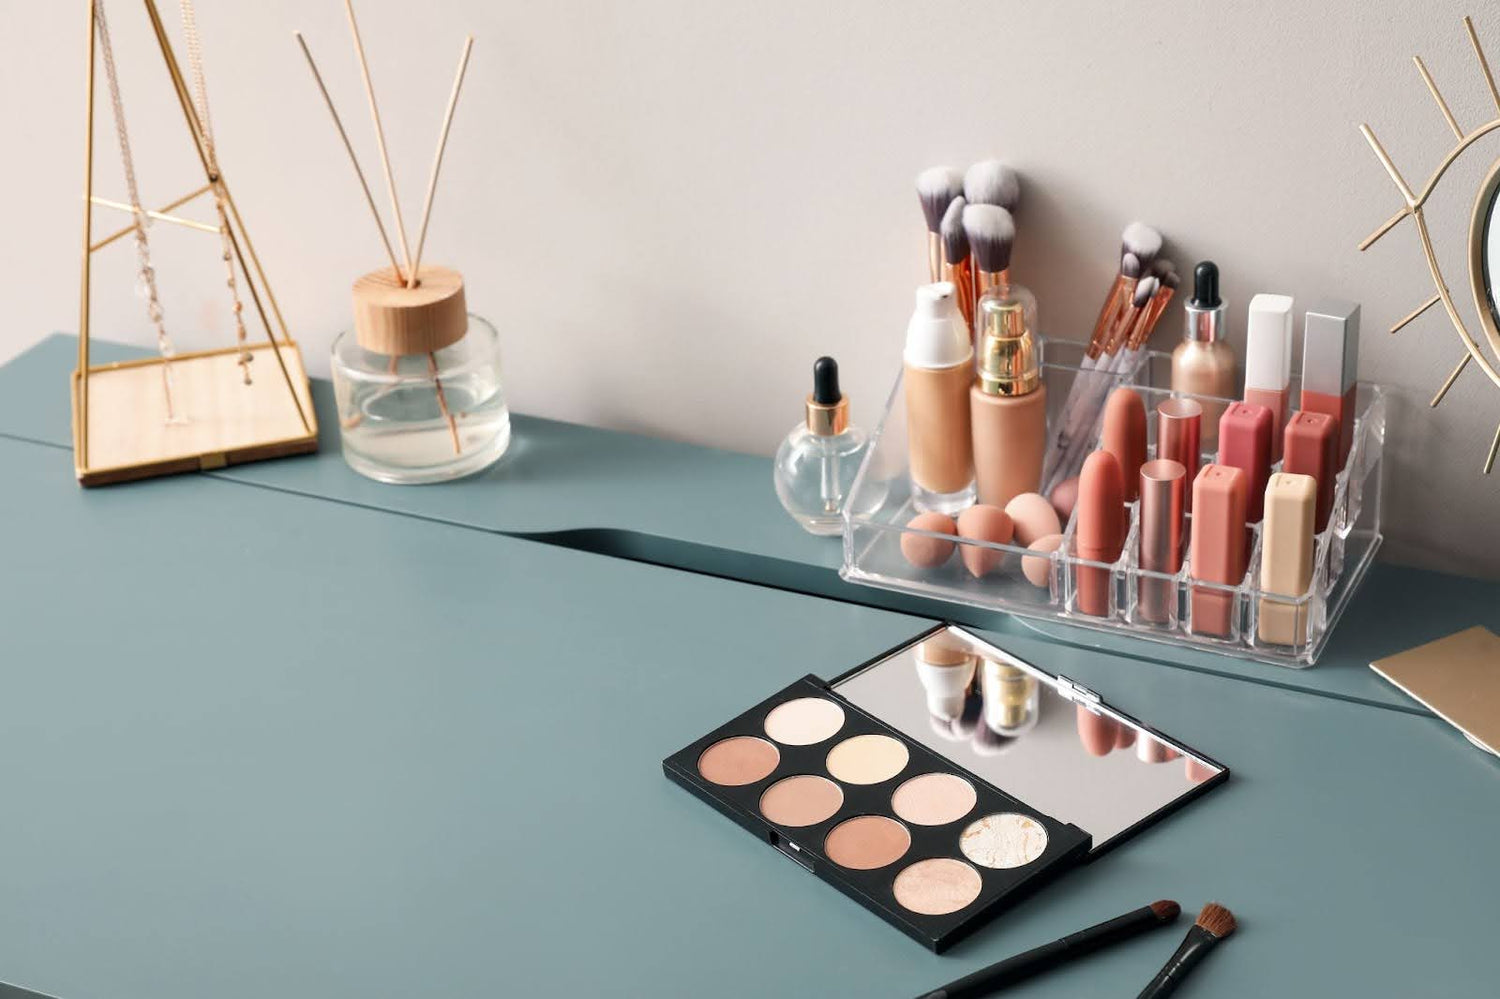 Makeup products neatly arranged on a desk and in makeup organizers, showcasing how to organize makeup. 